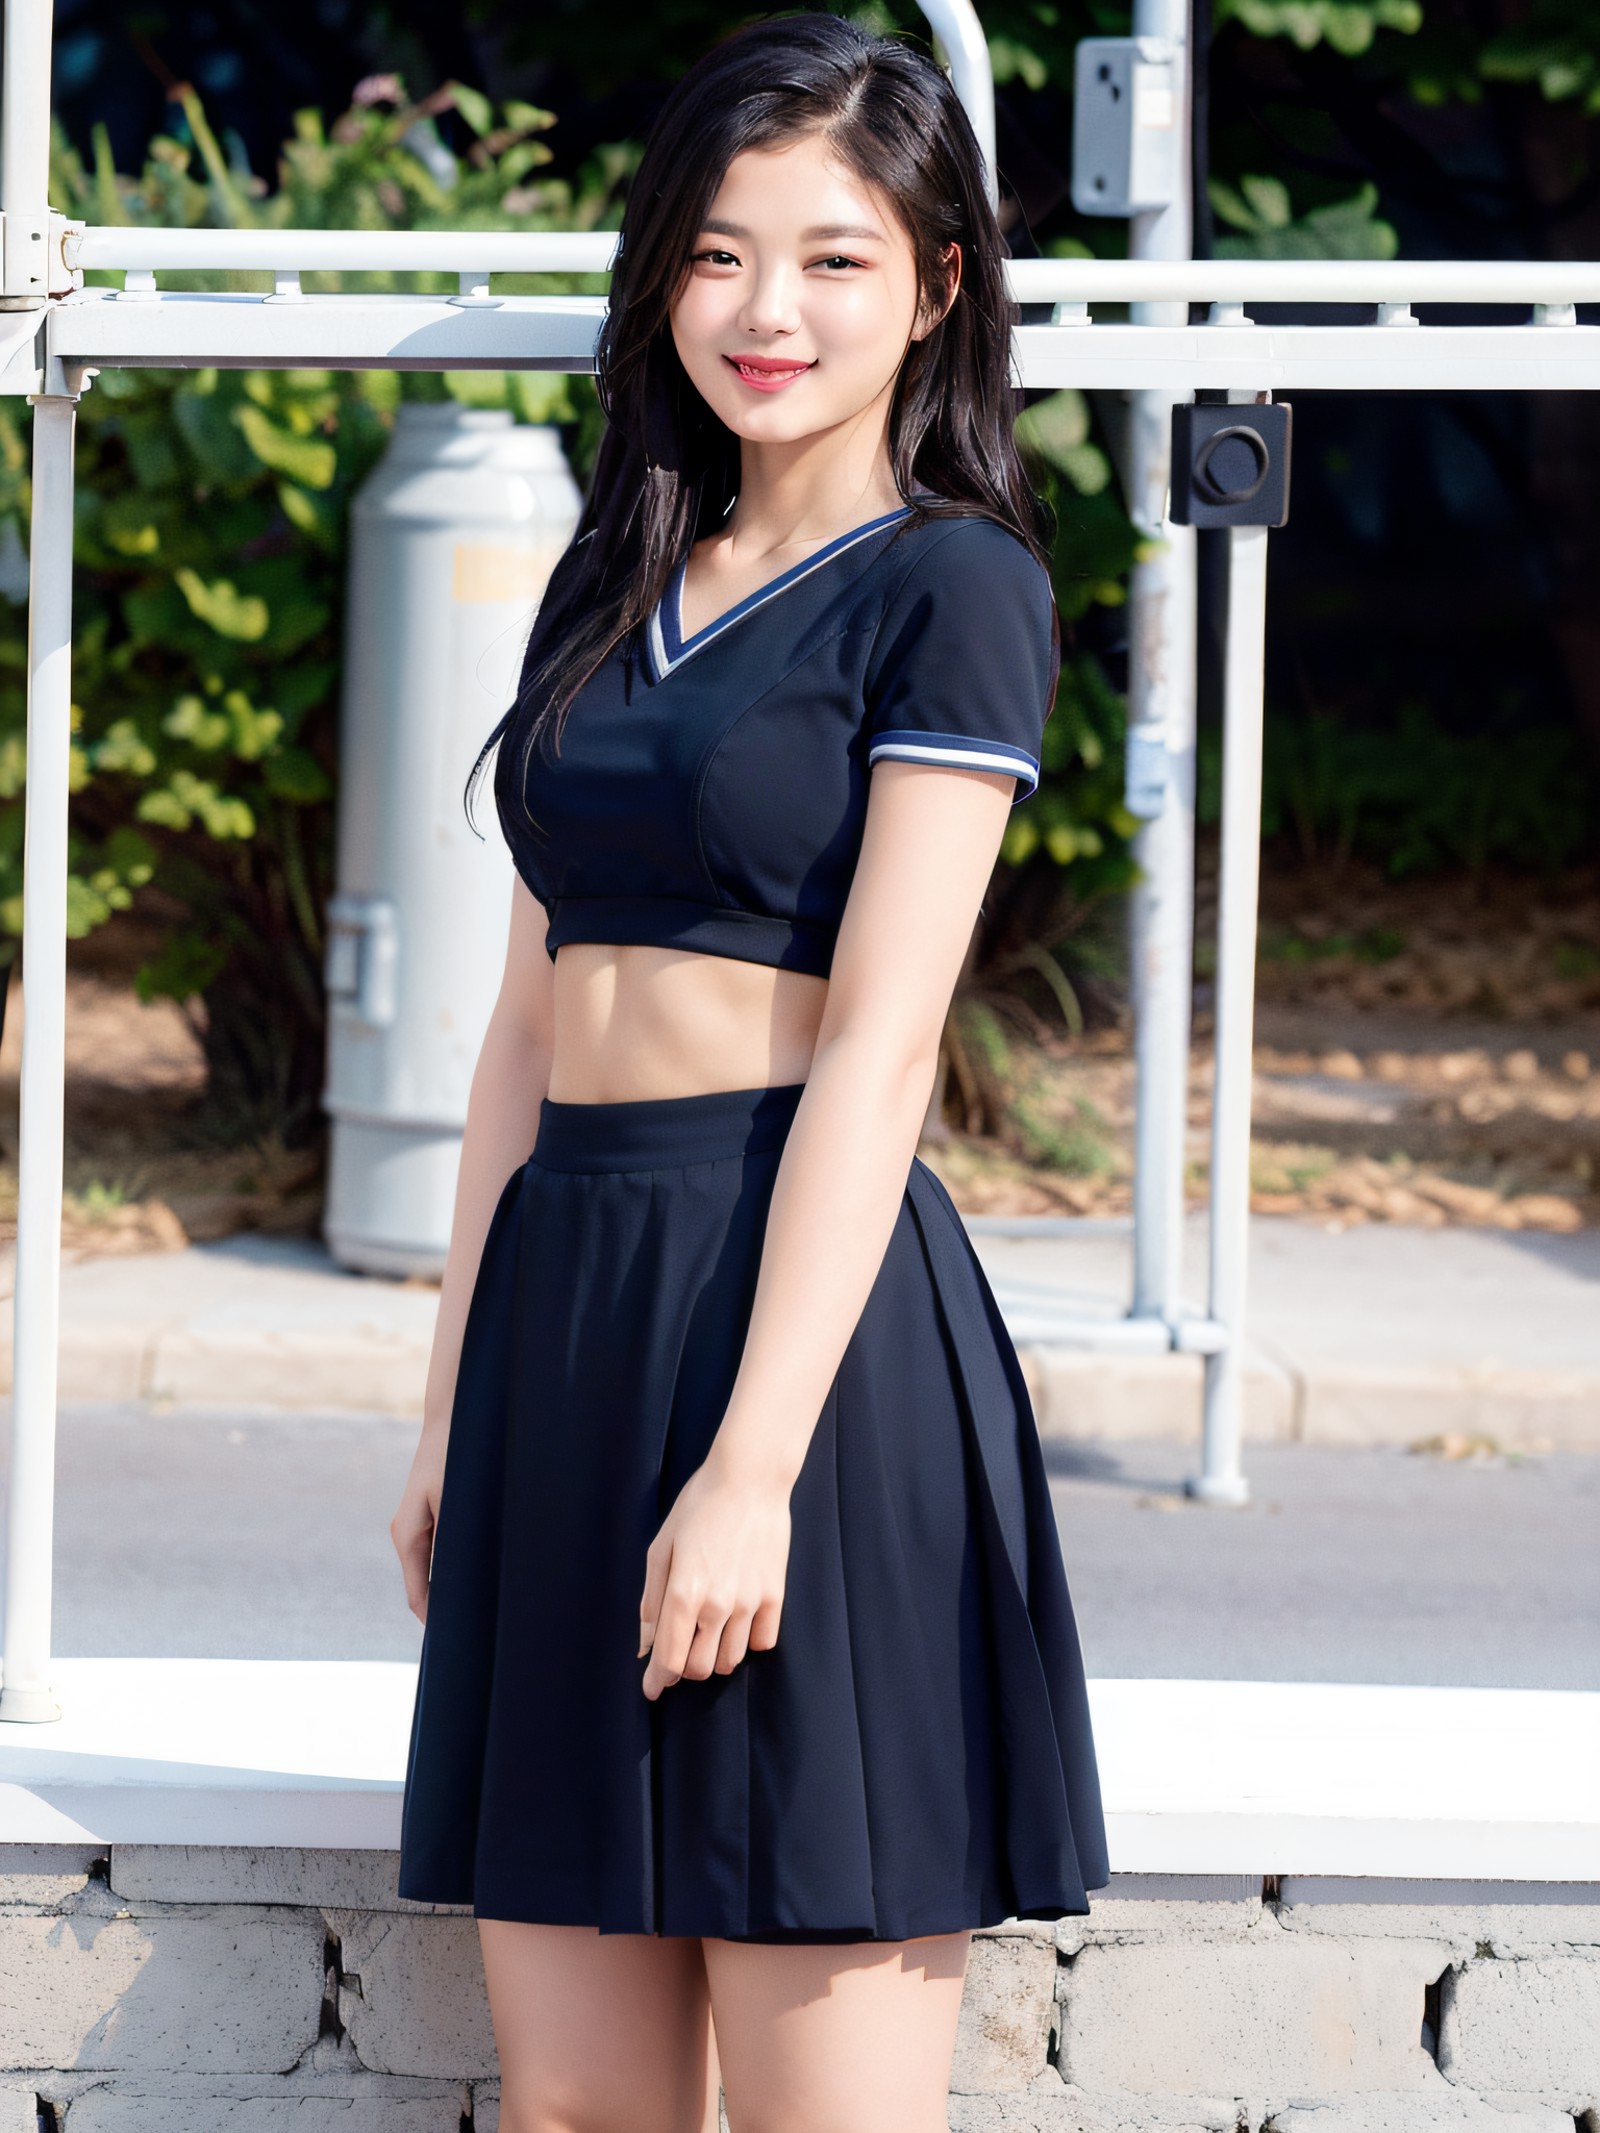 KYJung, black skirt, blue top, standing in the street, cityscape background, smile, (8k, RAW photo, best quality, masterpi...